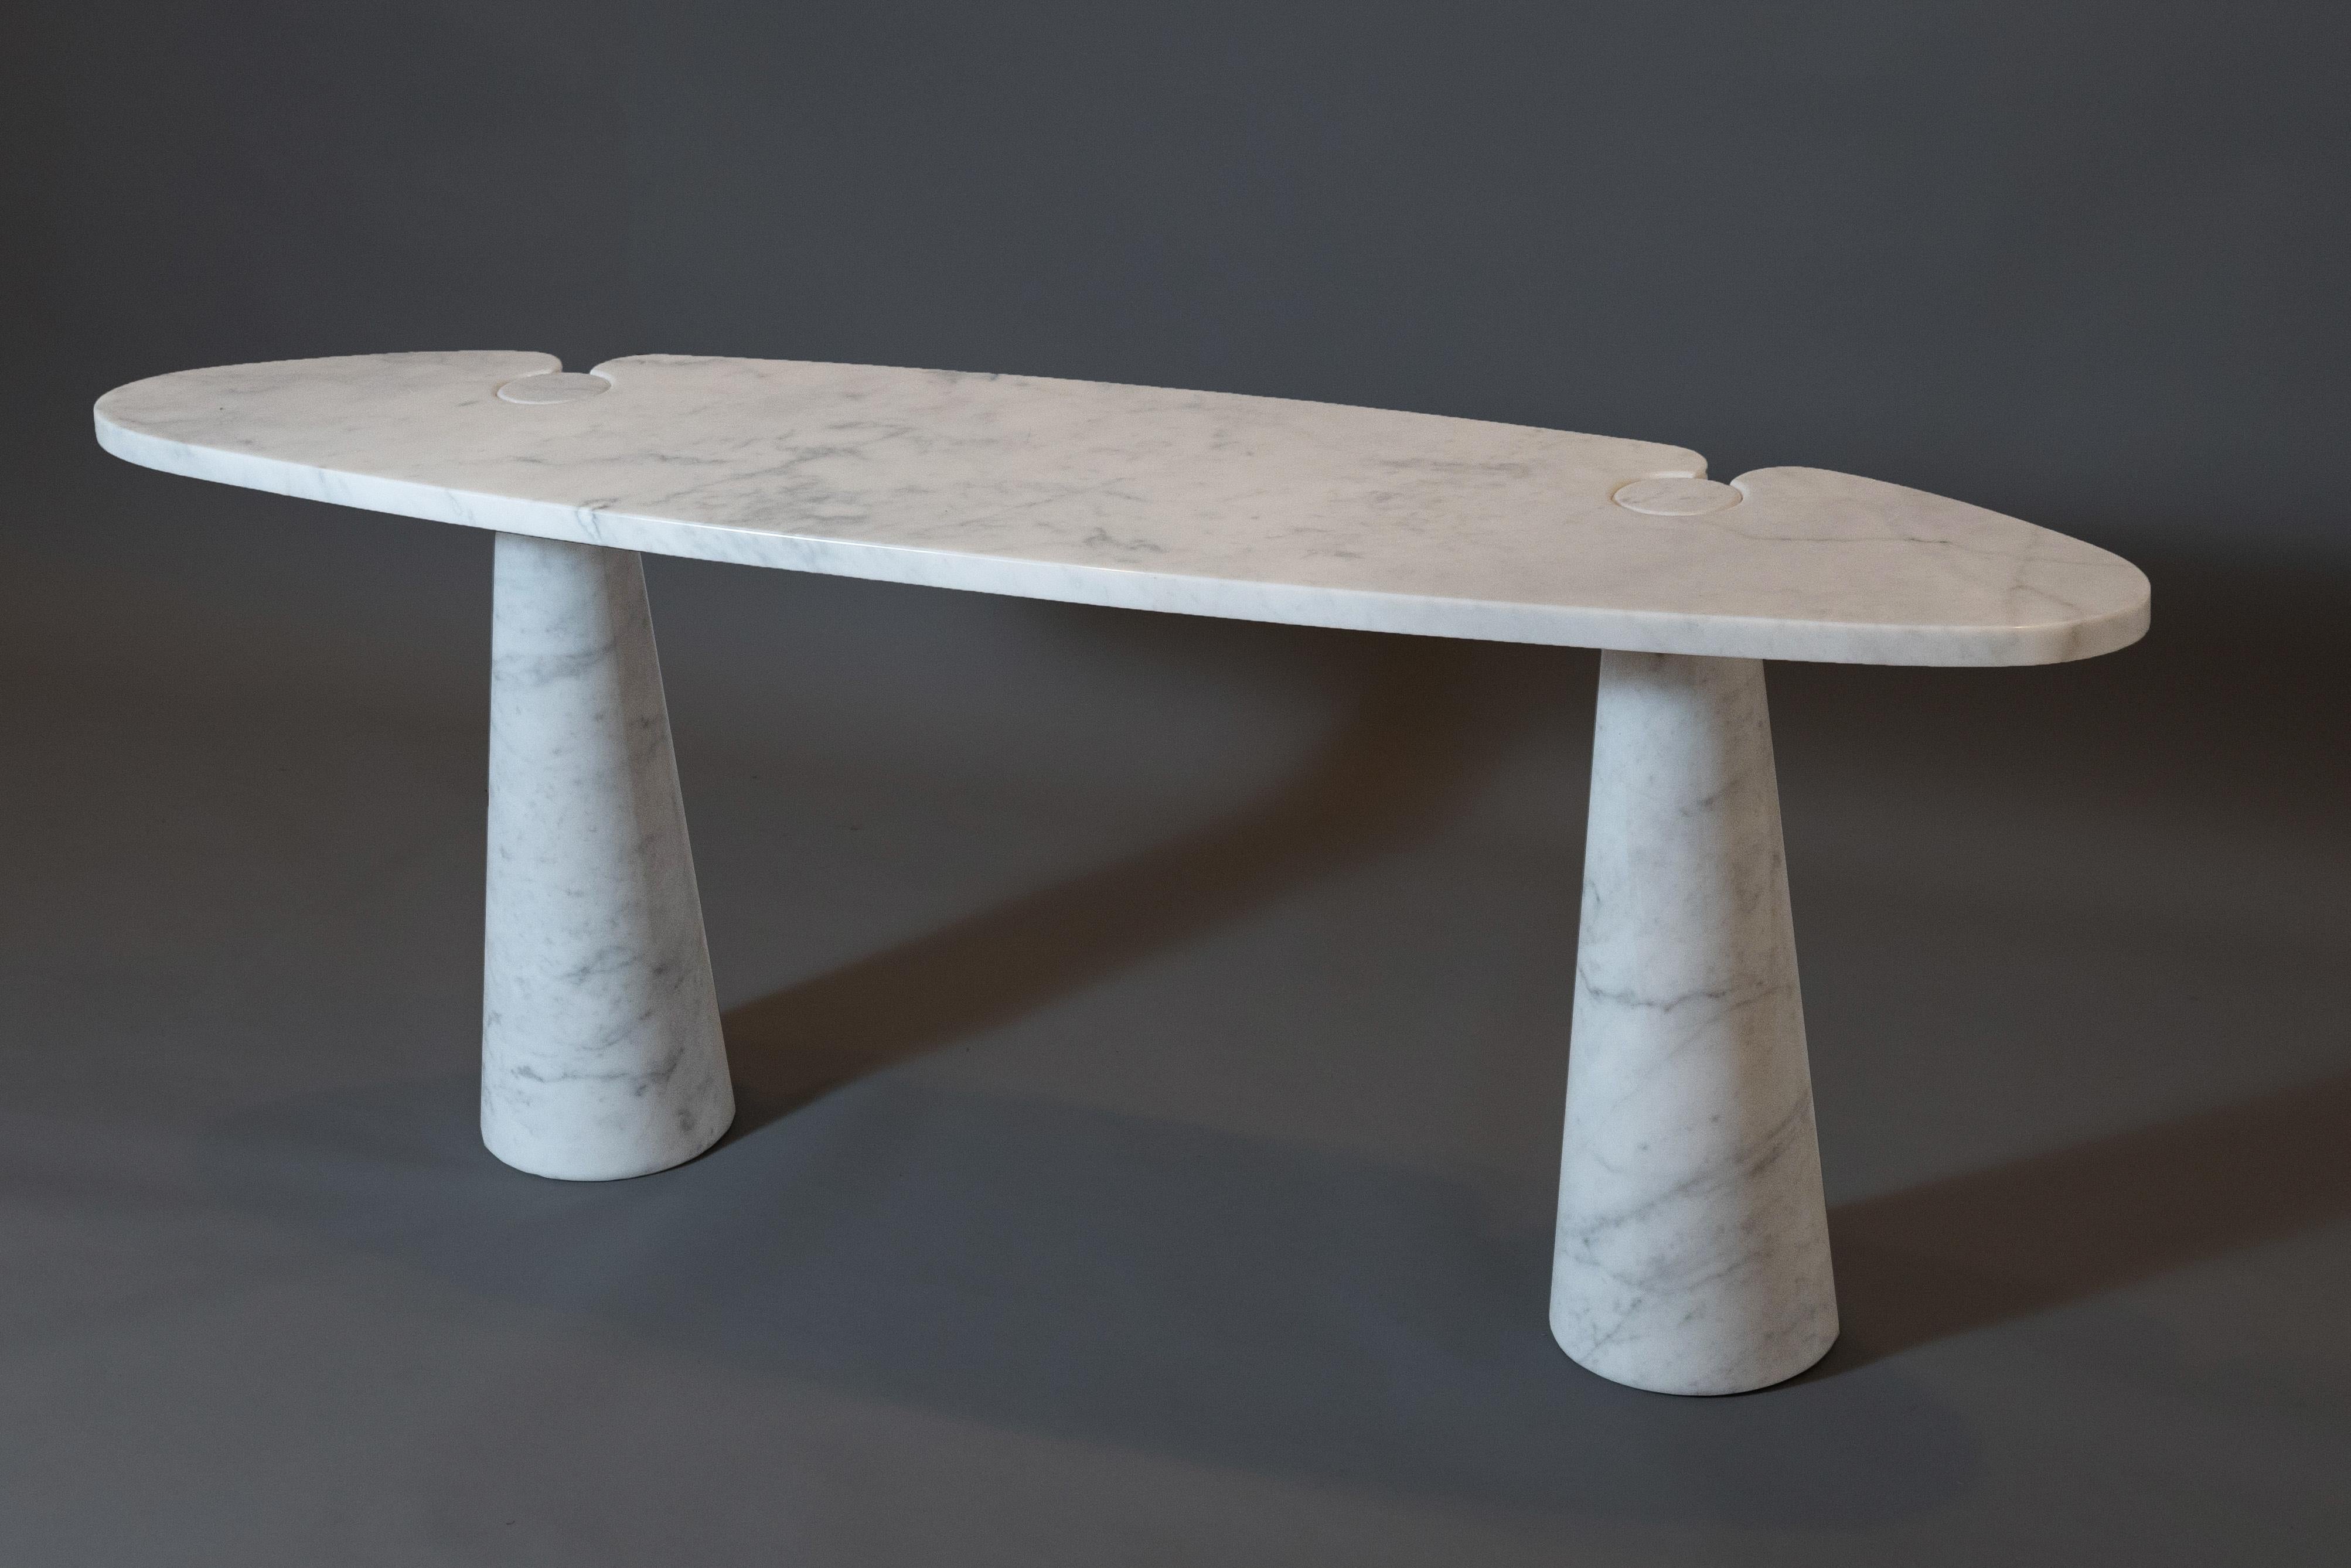 Angelo Mangiarotti (1921 - 2012) 

A beautiful Eros console by Angelo Mangiarotti for Skipper, in thick white Carrara marble with subtle grey veining. A large ovoid top with a flat back and elliptical front is ingeniously incised with two delicate